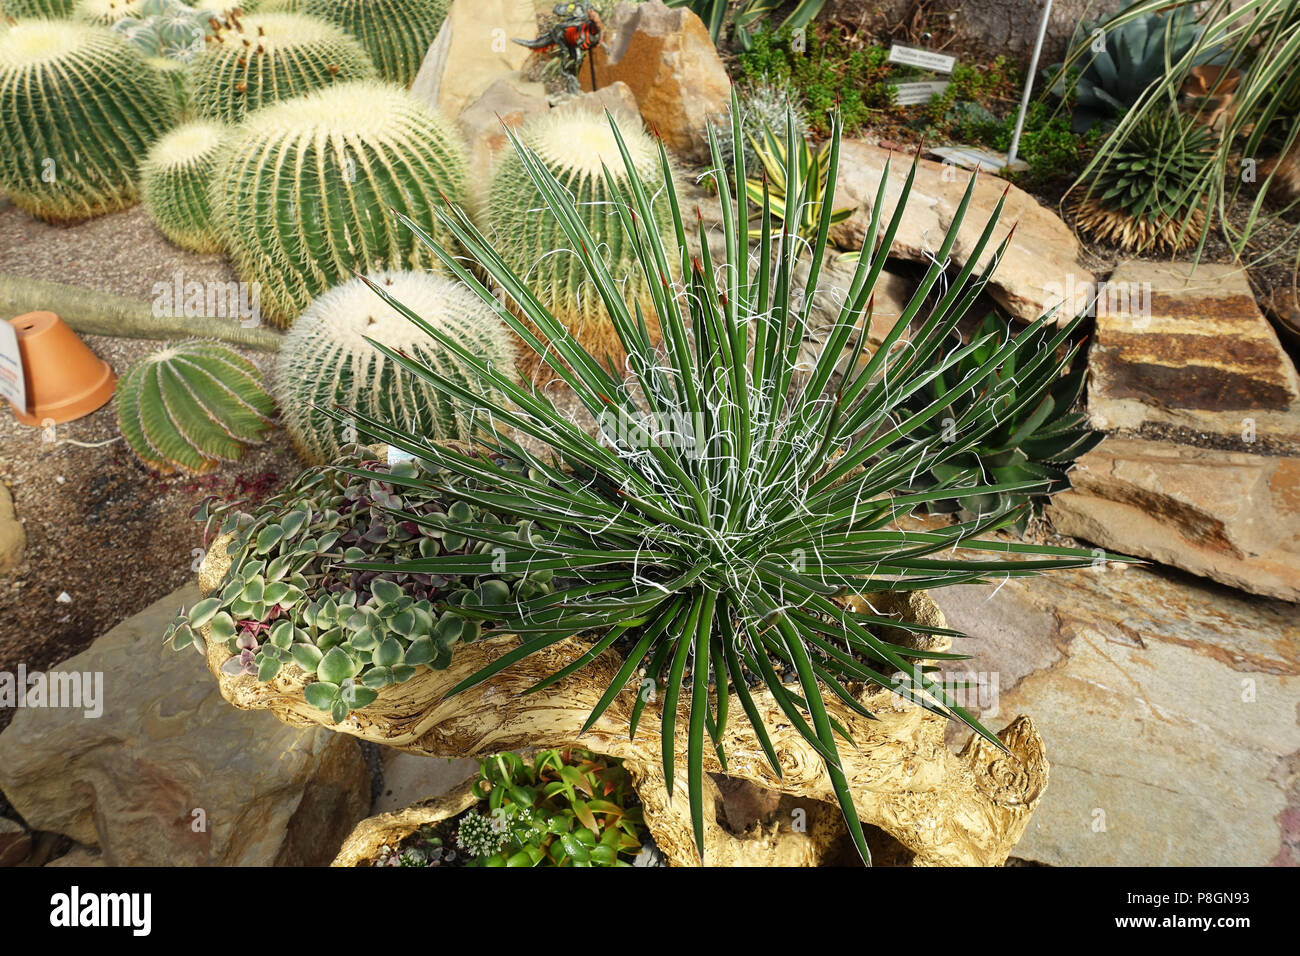 Yucca glauca  or known as soapweed yucca growing with  Golden Barrel Cactus Stock Photo